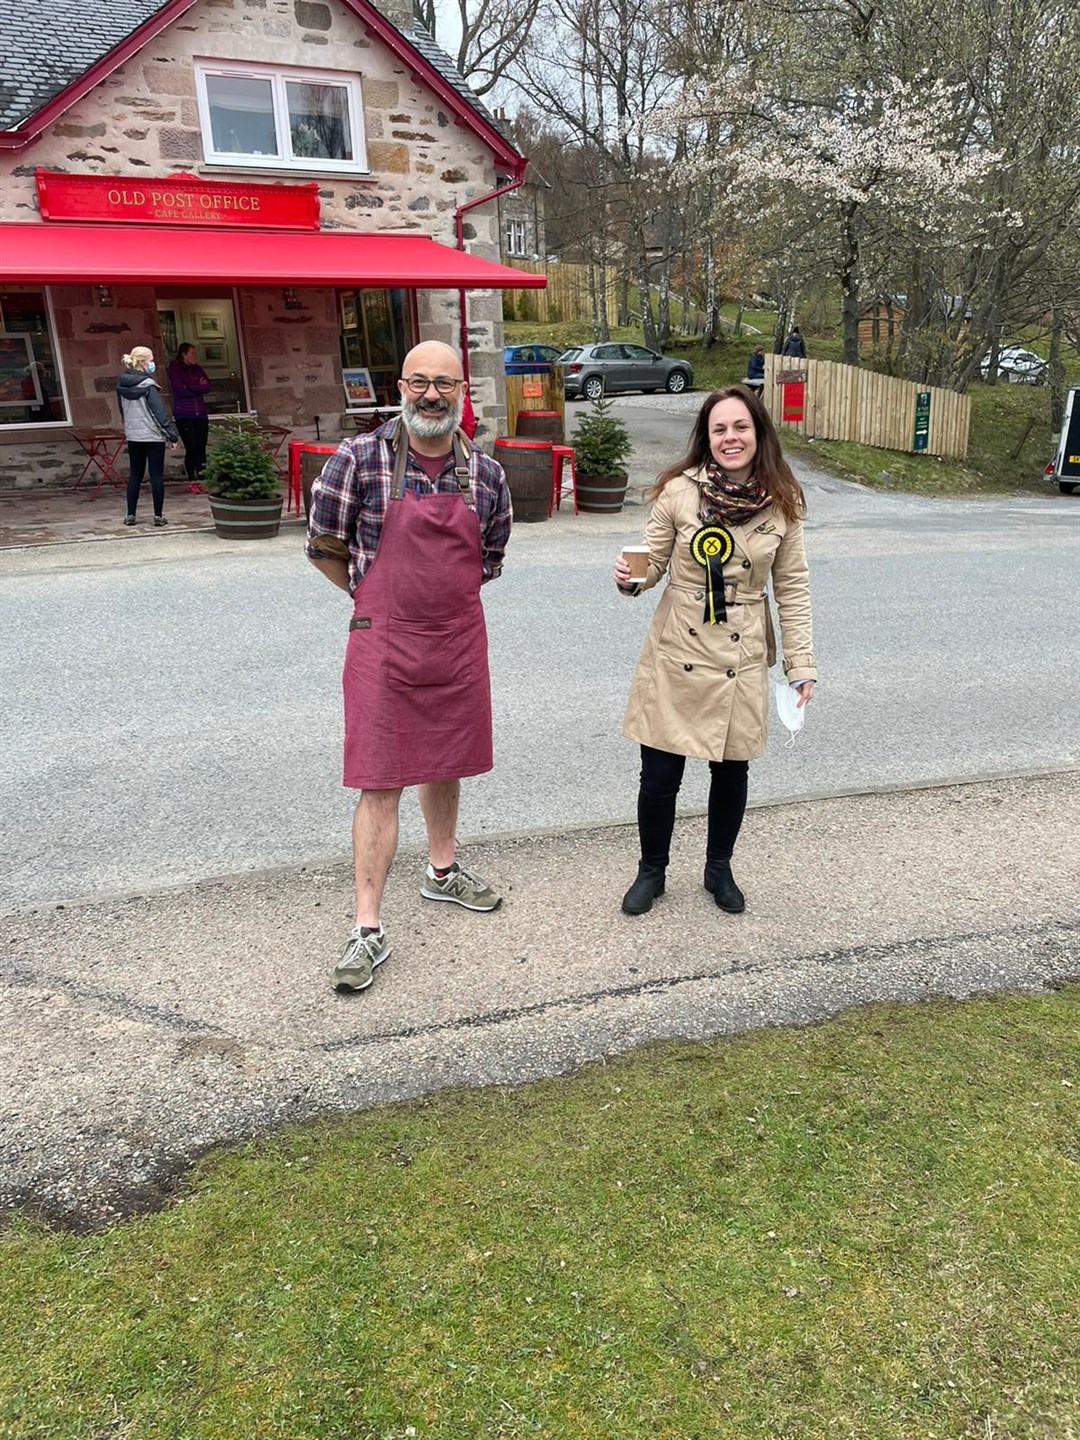 Holyrood candidate Kate Forbes with Toni Vastano, owner of The Old Post Office cafe in Kincraig.